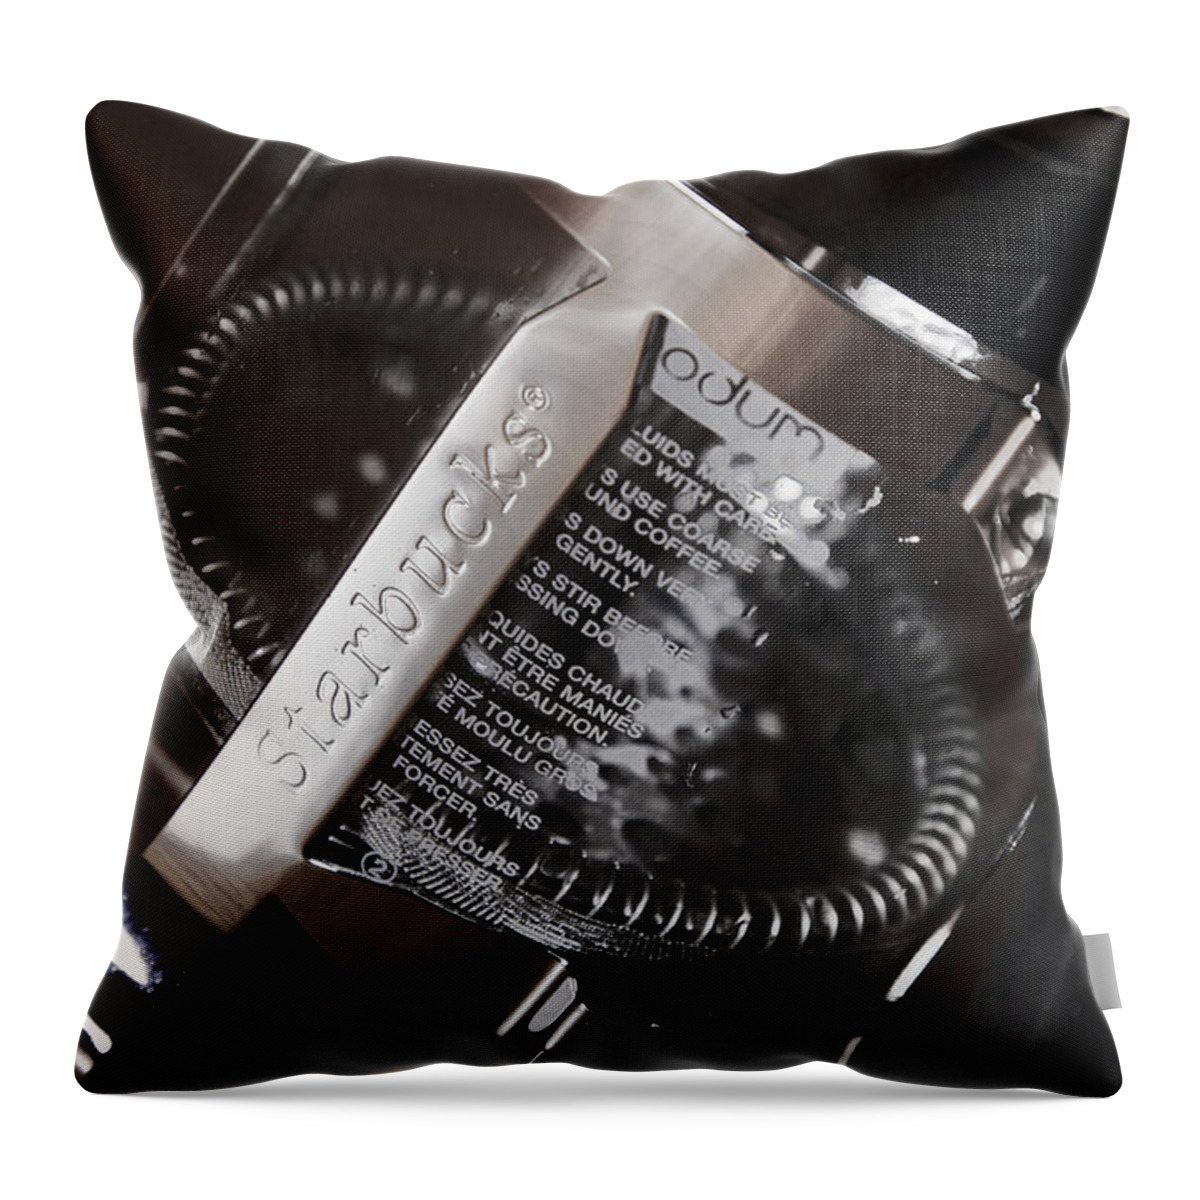 Starbucks Throw Pillow featuring the photograph Starbucks French Press by Fransiskus Sudjojo